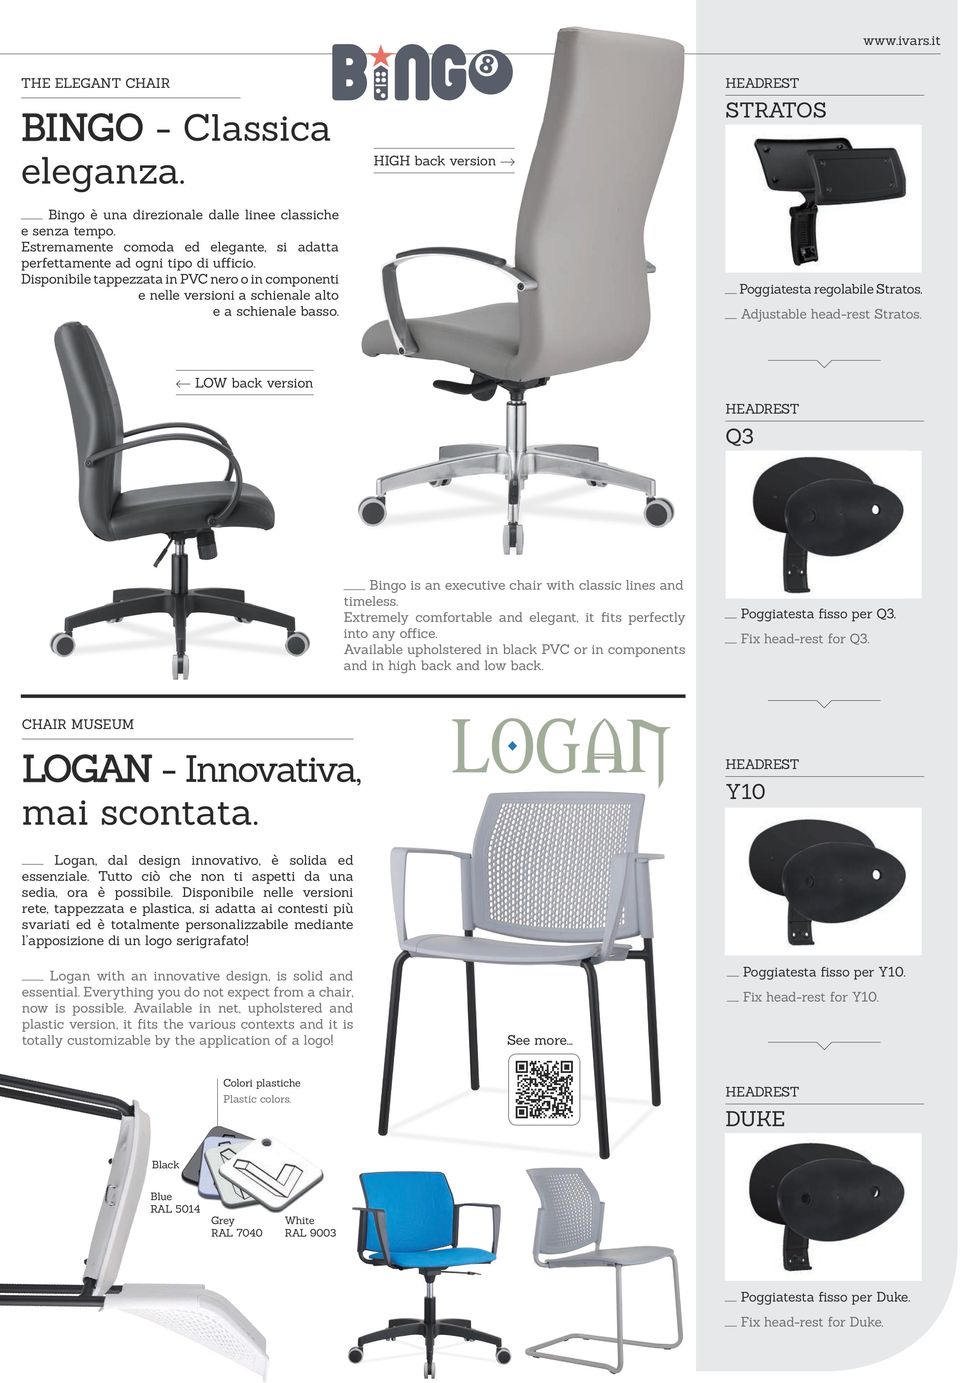 Adjustable head-rest Stratos. LOW back version HEADREST Q3 Bingo is an executive chair with classic lines and timeless. Extremely comfortable and elegant, it fits perfectly into any office.